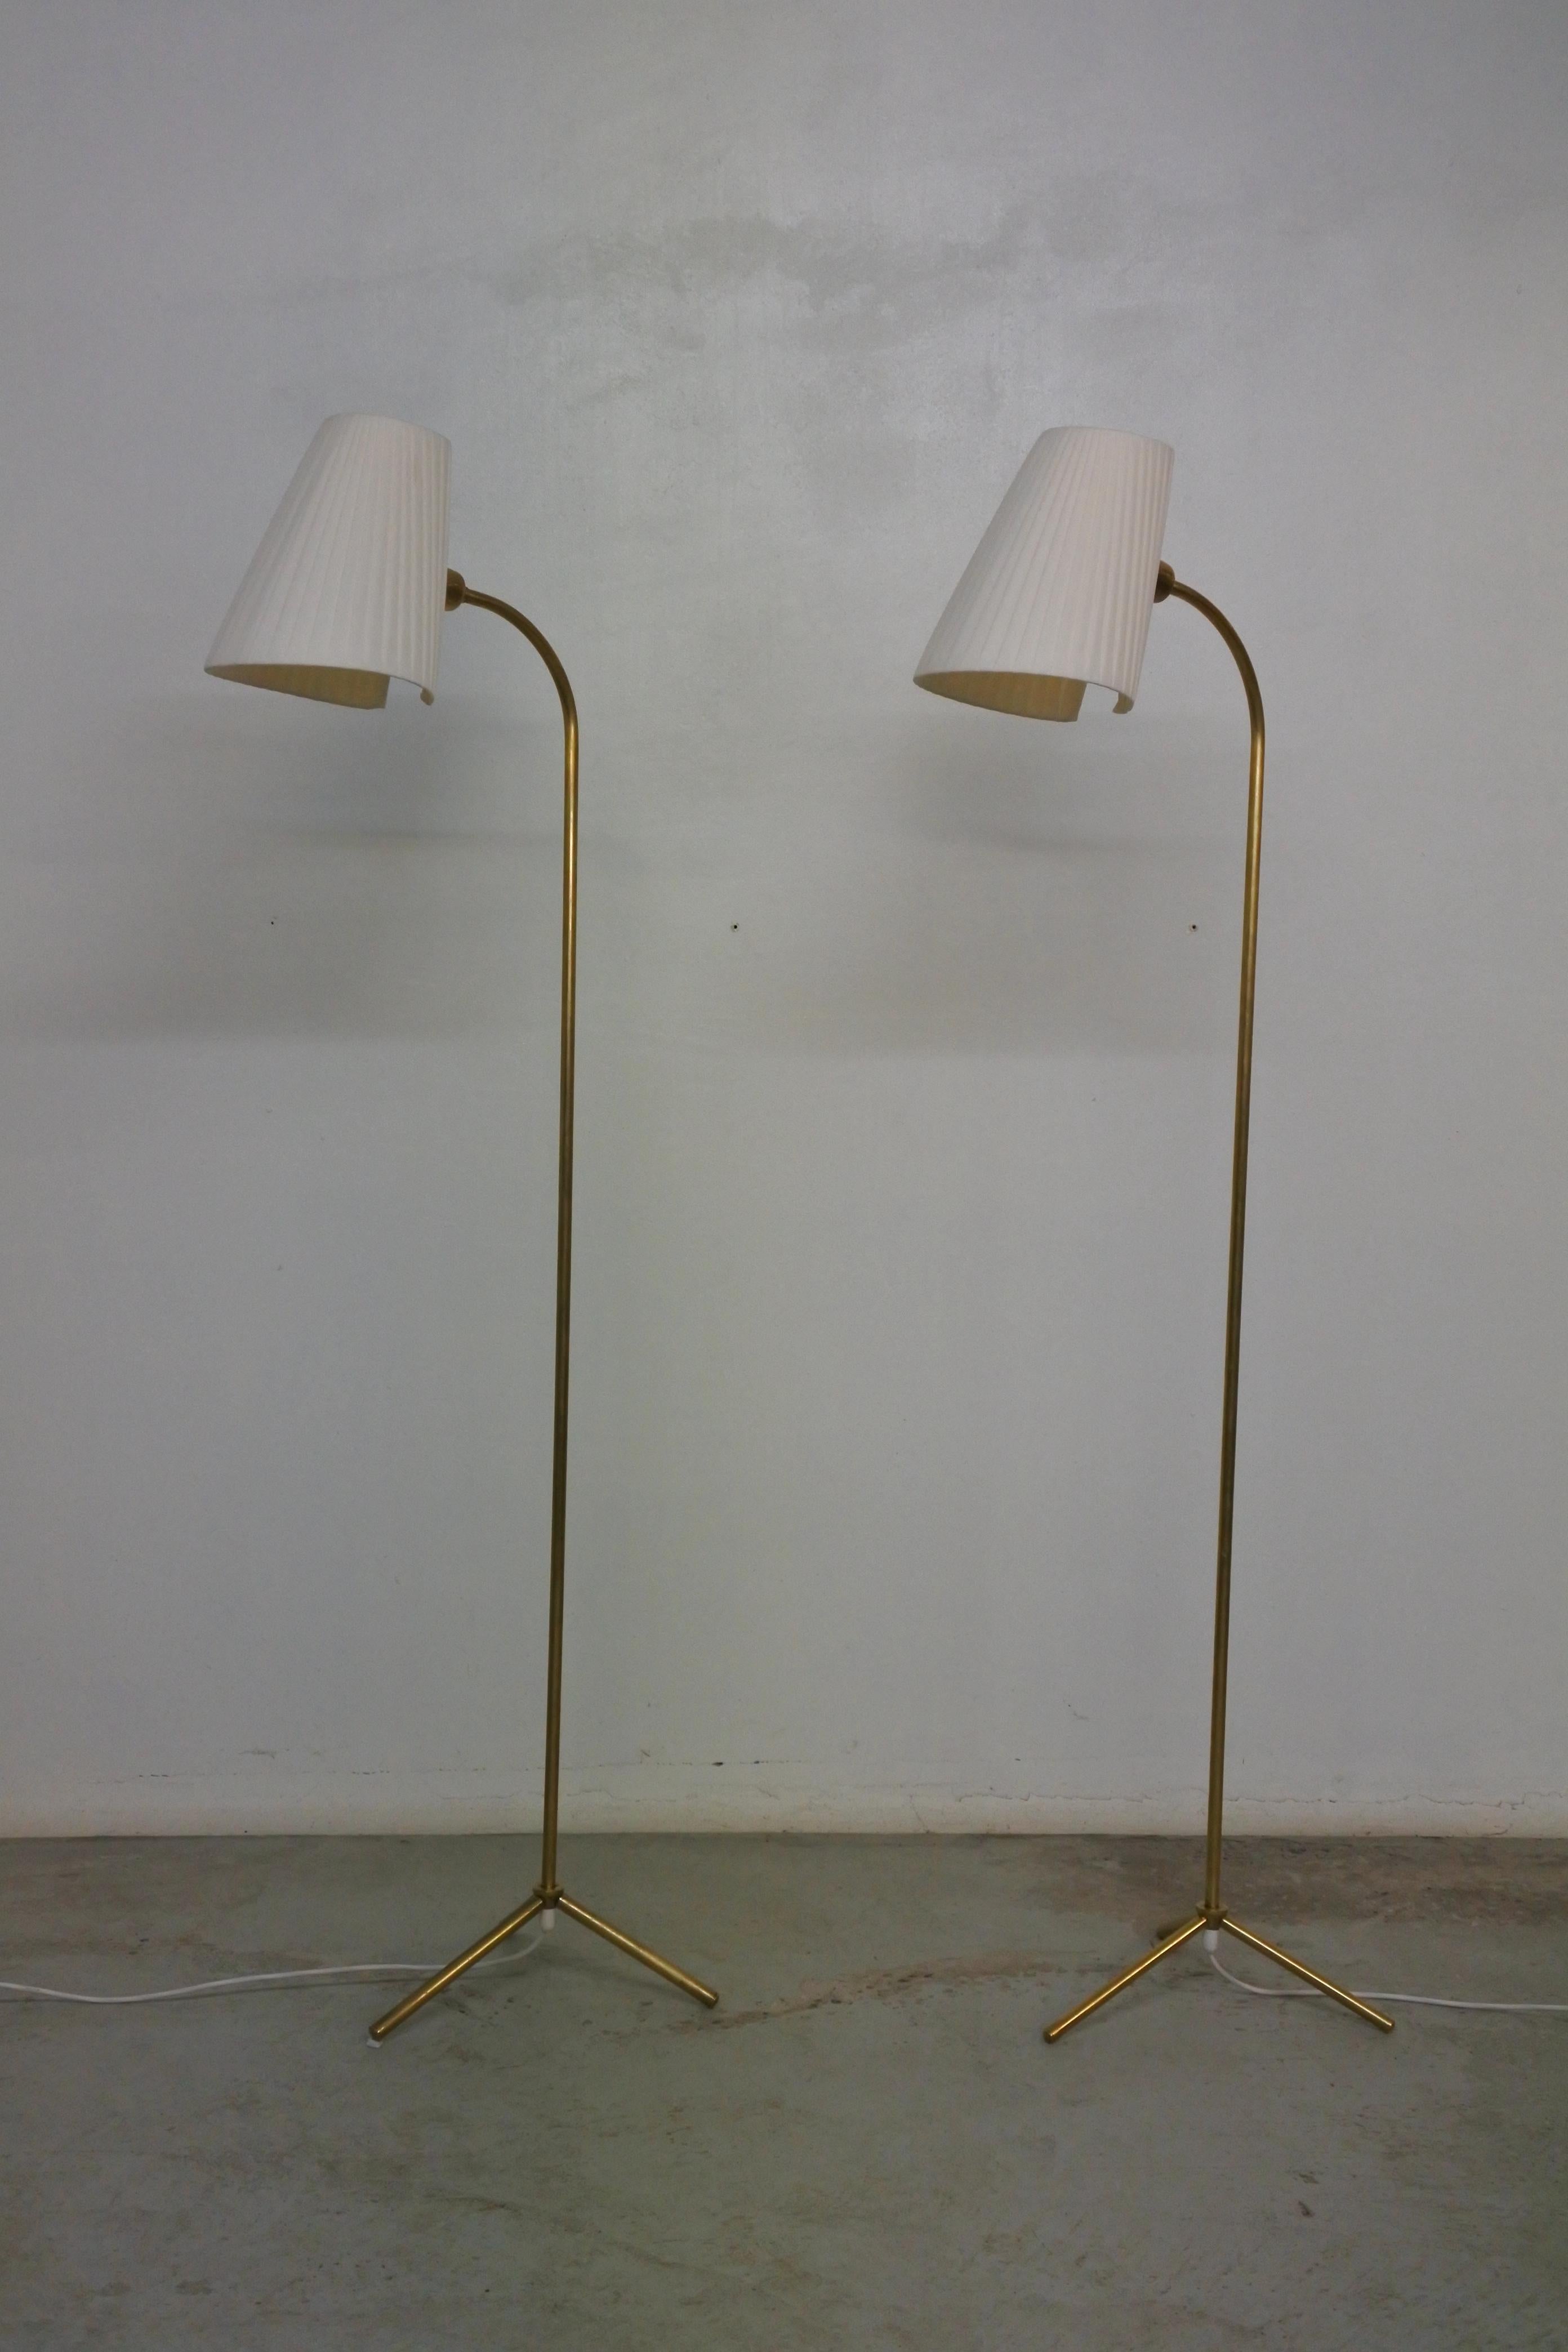 2 tripod floor lamps by Lisa Johansson Pape.
Manufactured by Orno in the 1950s.
Solid brass stems and feet, silk shades.
The shades can be orientated in all directions.

Even though the 2 floor lamps share the same provenance, they are slightly